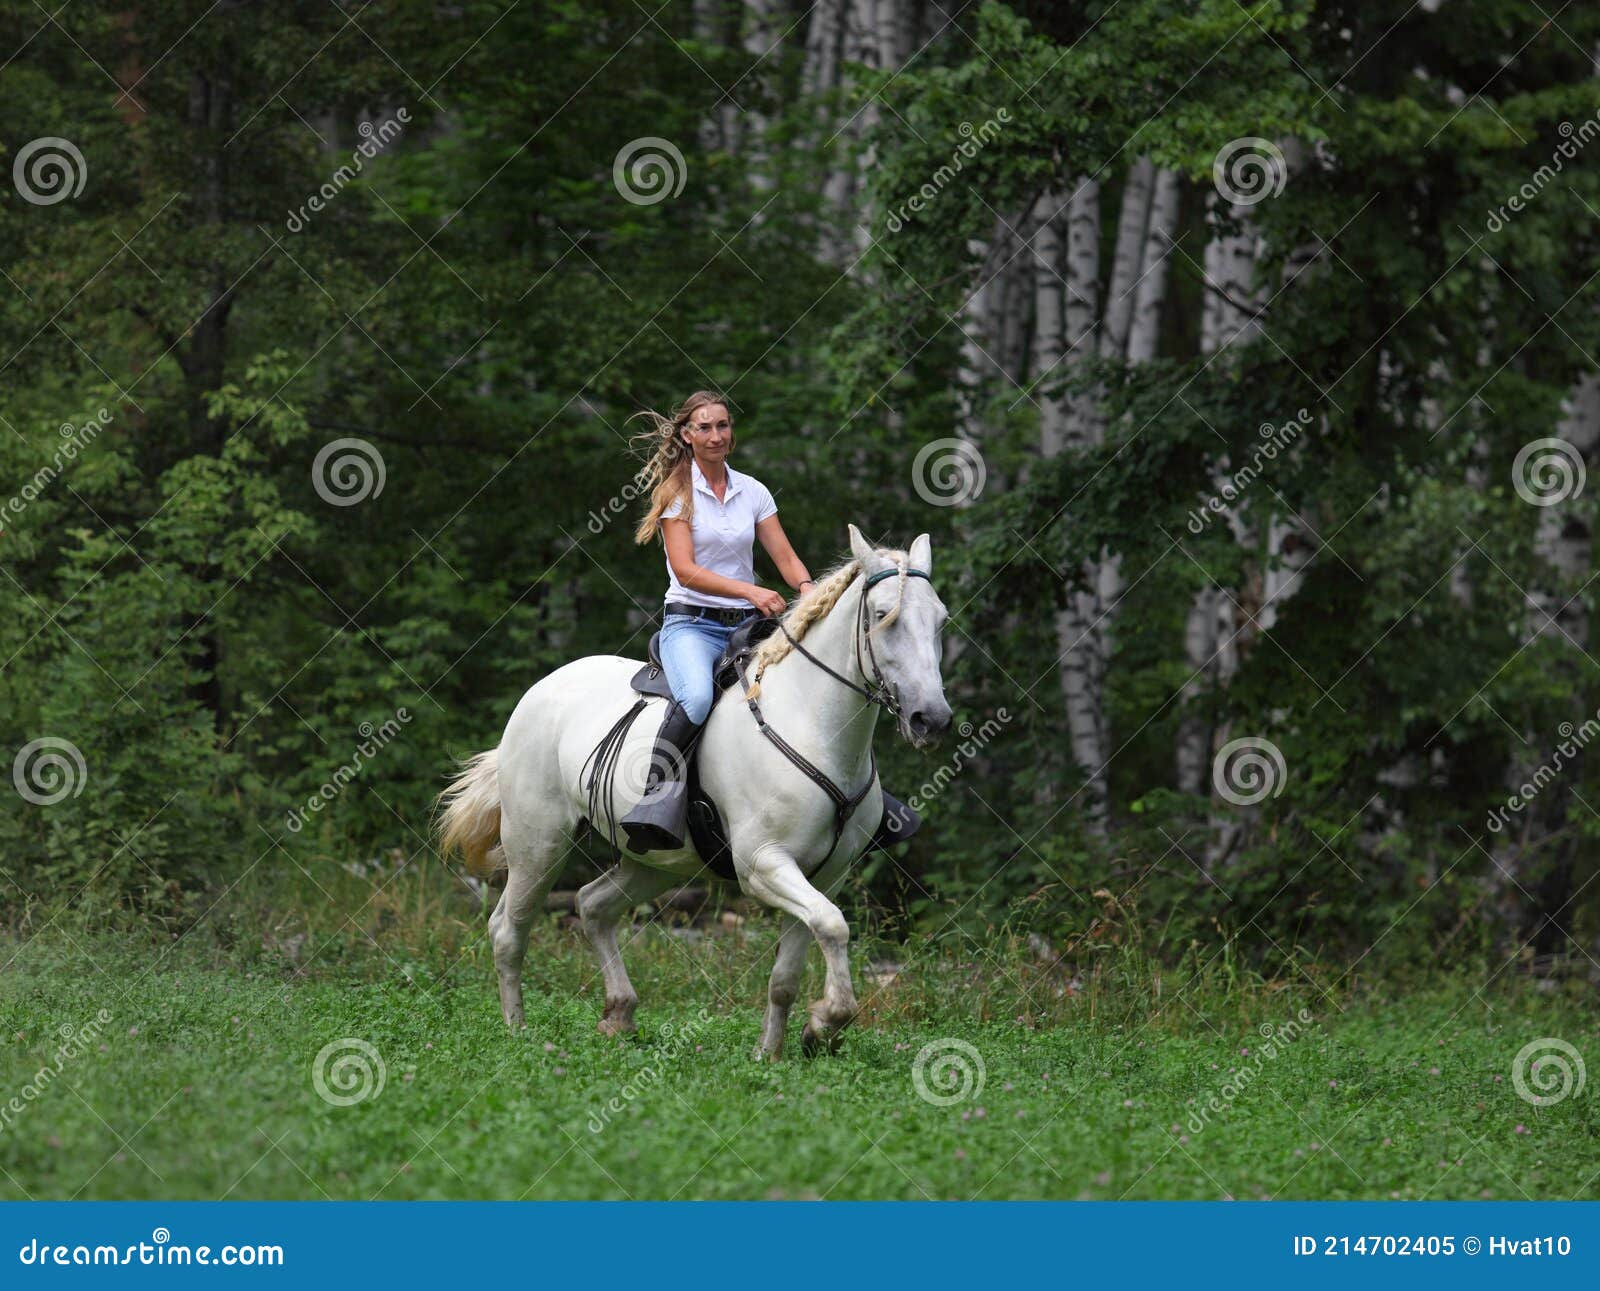 beautiful equestrian cowgirl riding a horse in the summer forest